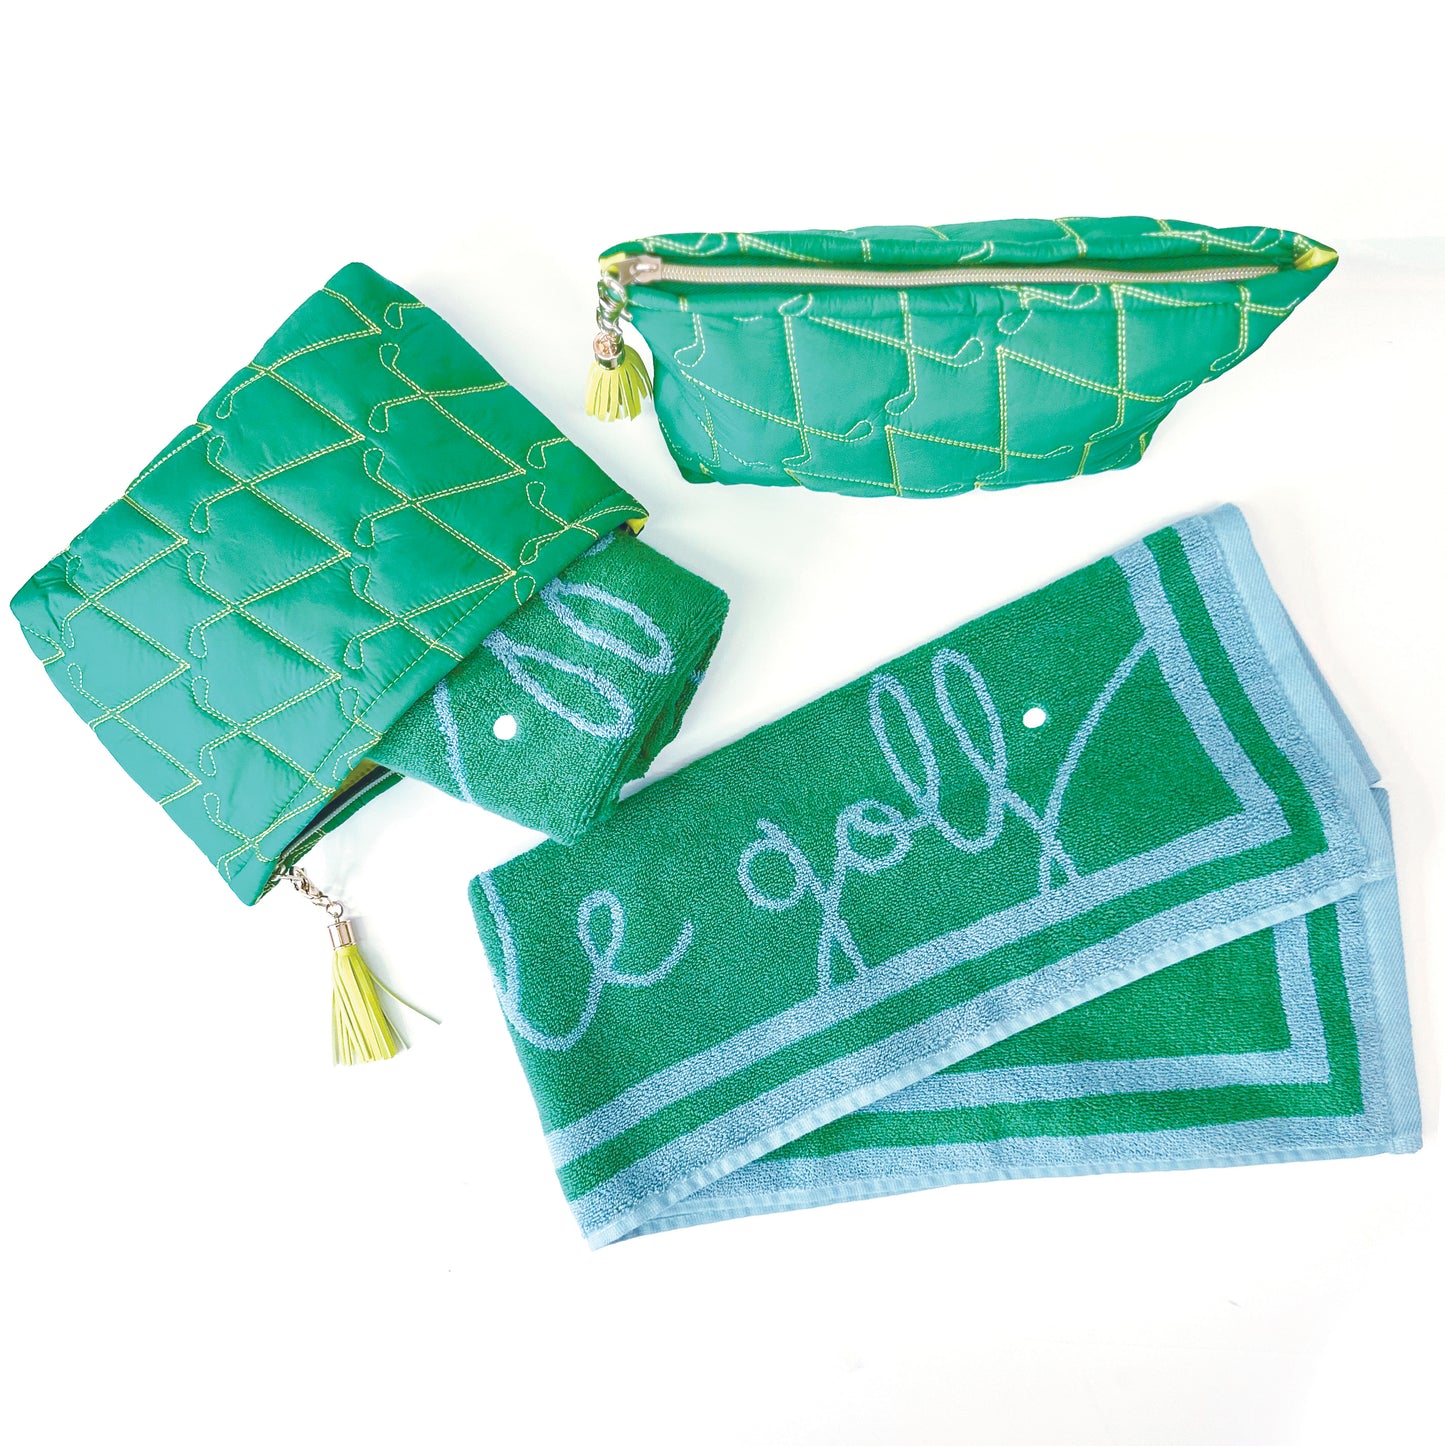 The Green Travel Pouch & Towel Set